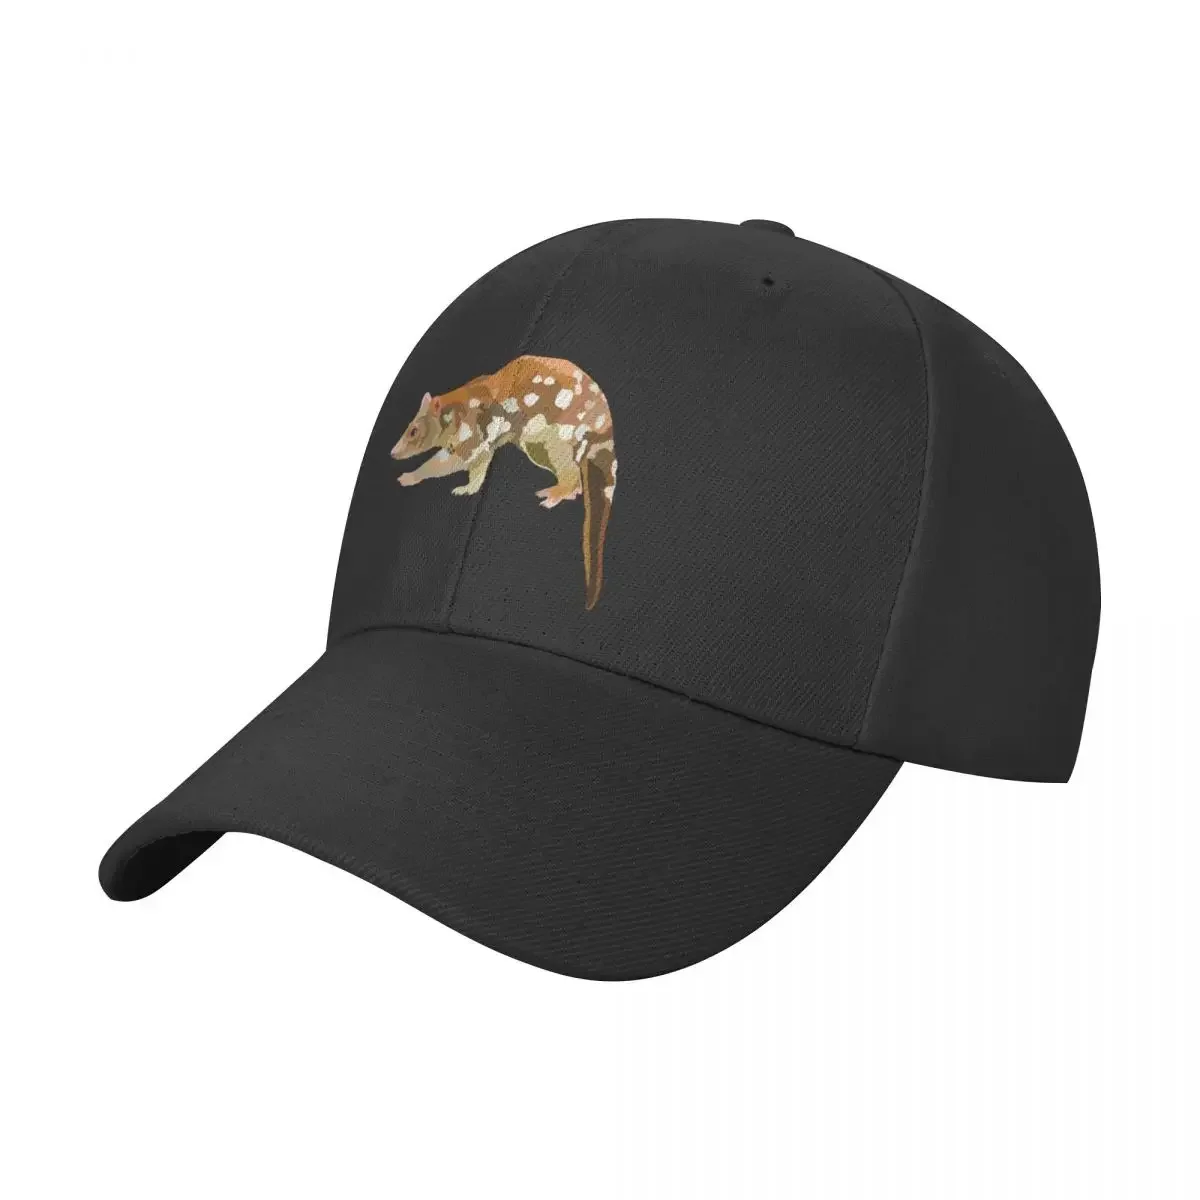 

T is for Tiger Quoll Baseball Cap fashionable Hat Man Luxury Uv Protection Solar Hat cute Men Caps Women's